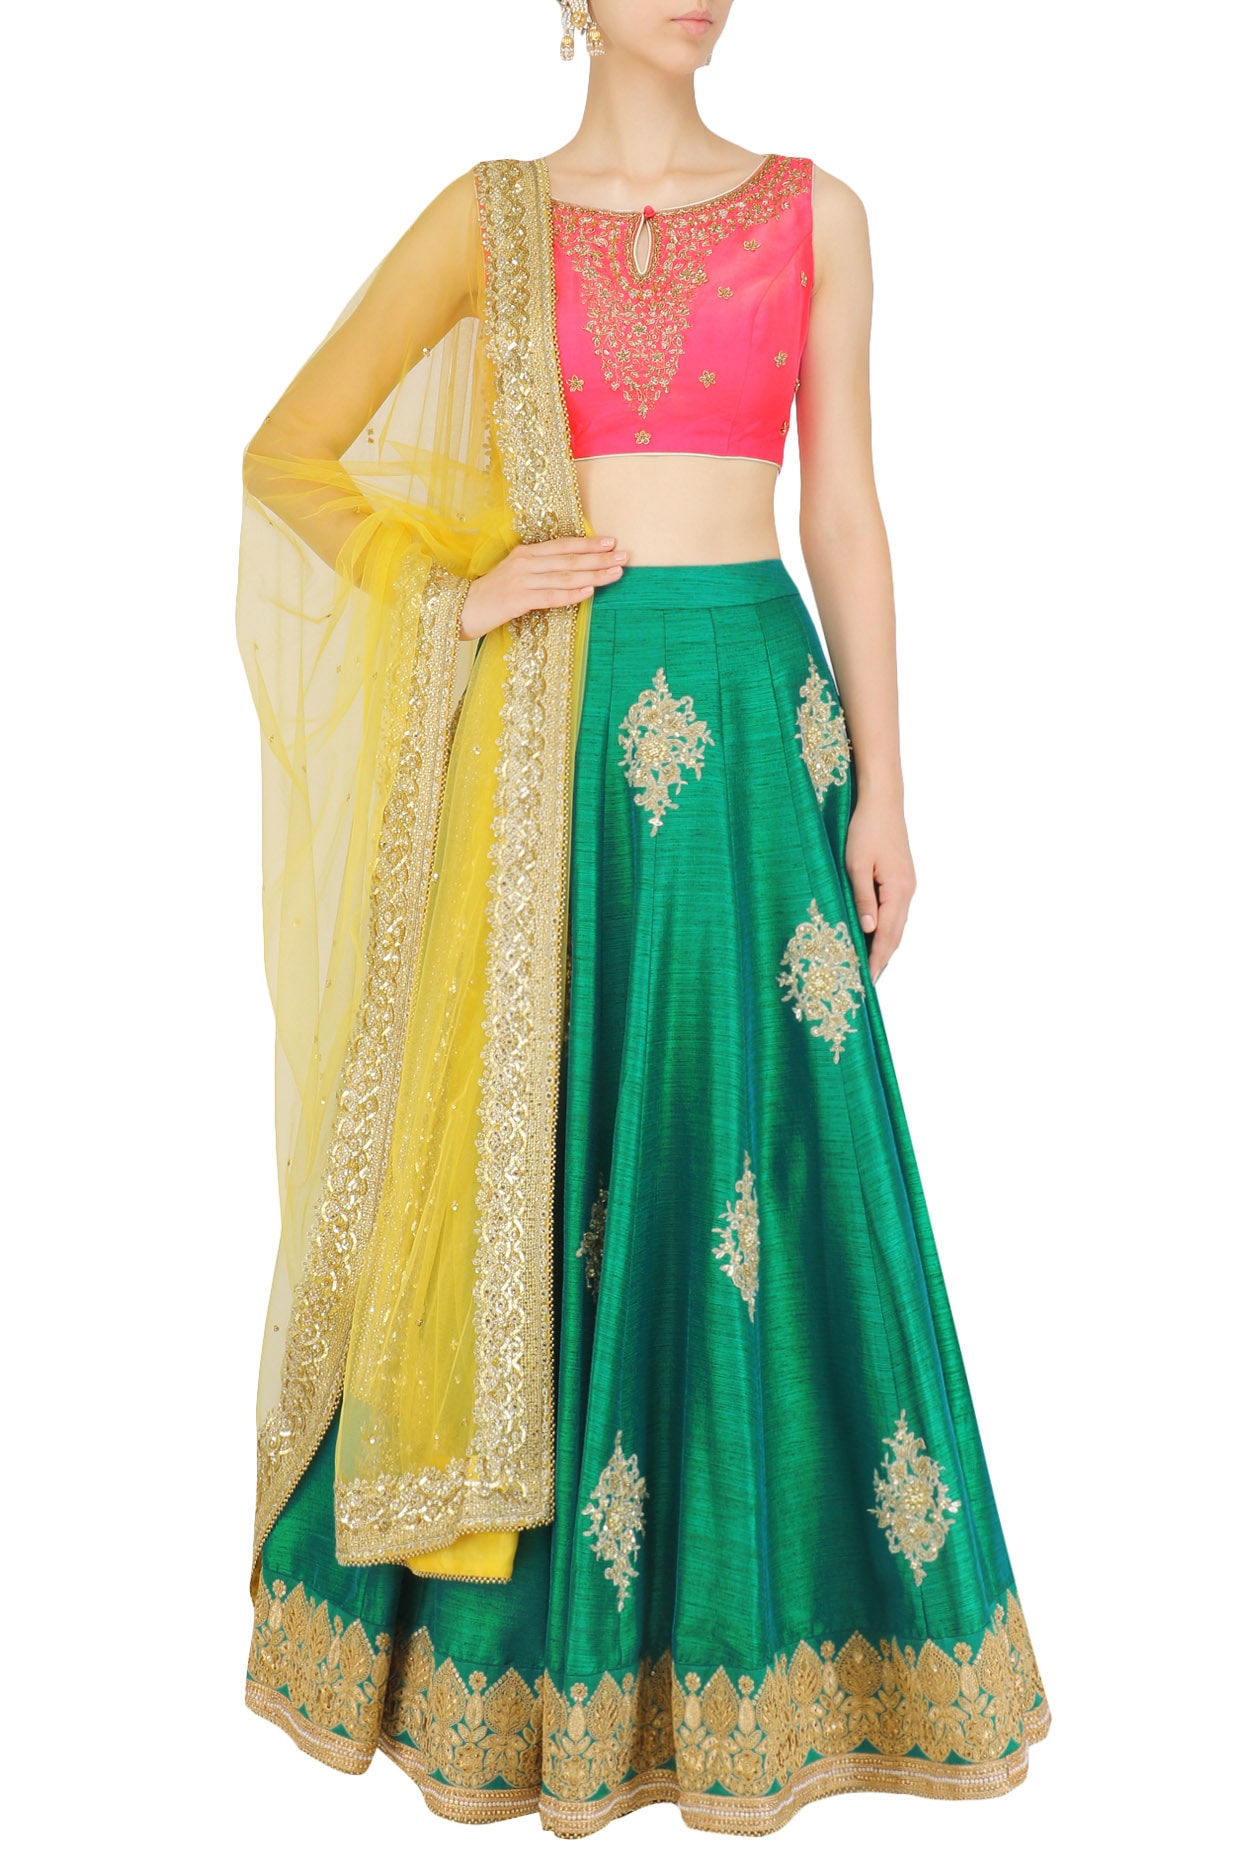 LemonGreen Lehenga With Oyster Floral Blouse & Pink Dupatta Trendroots